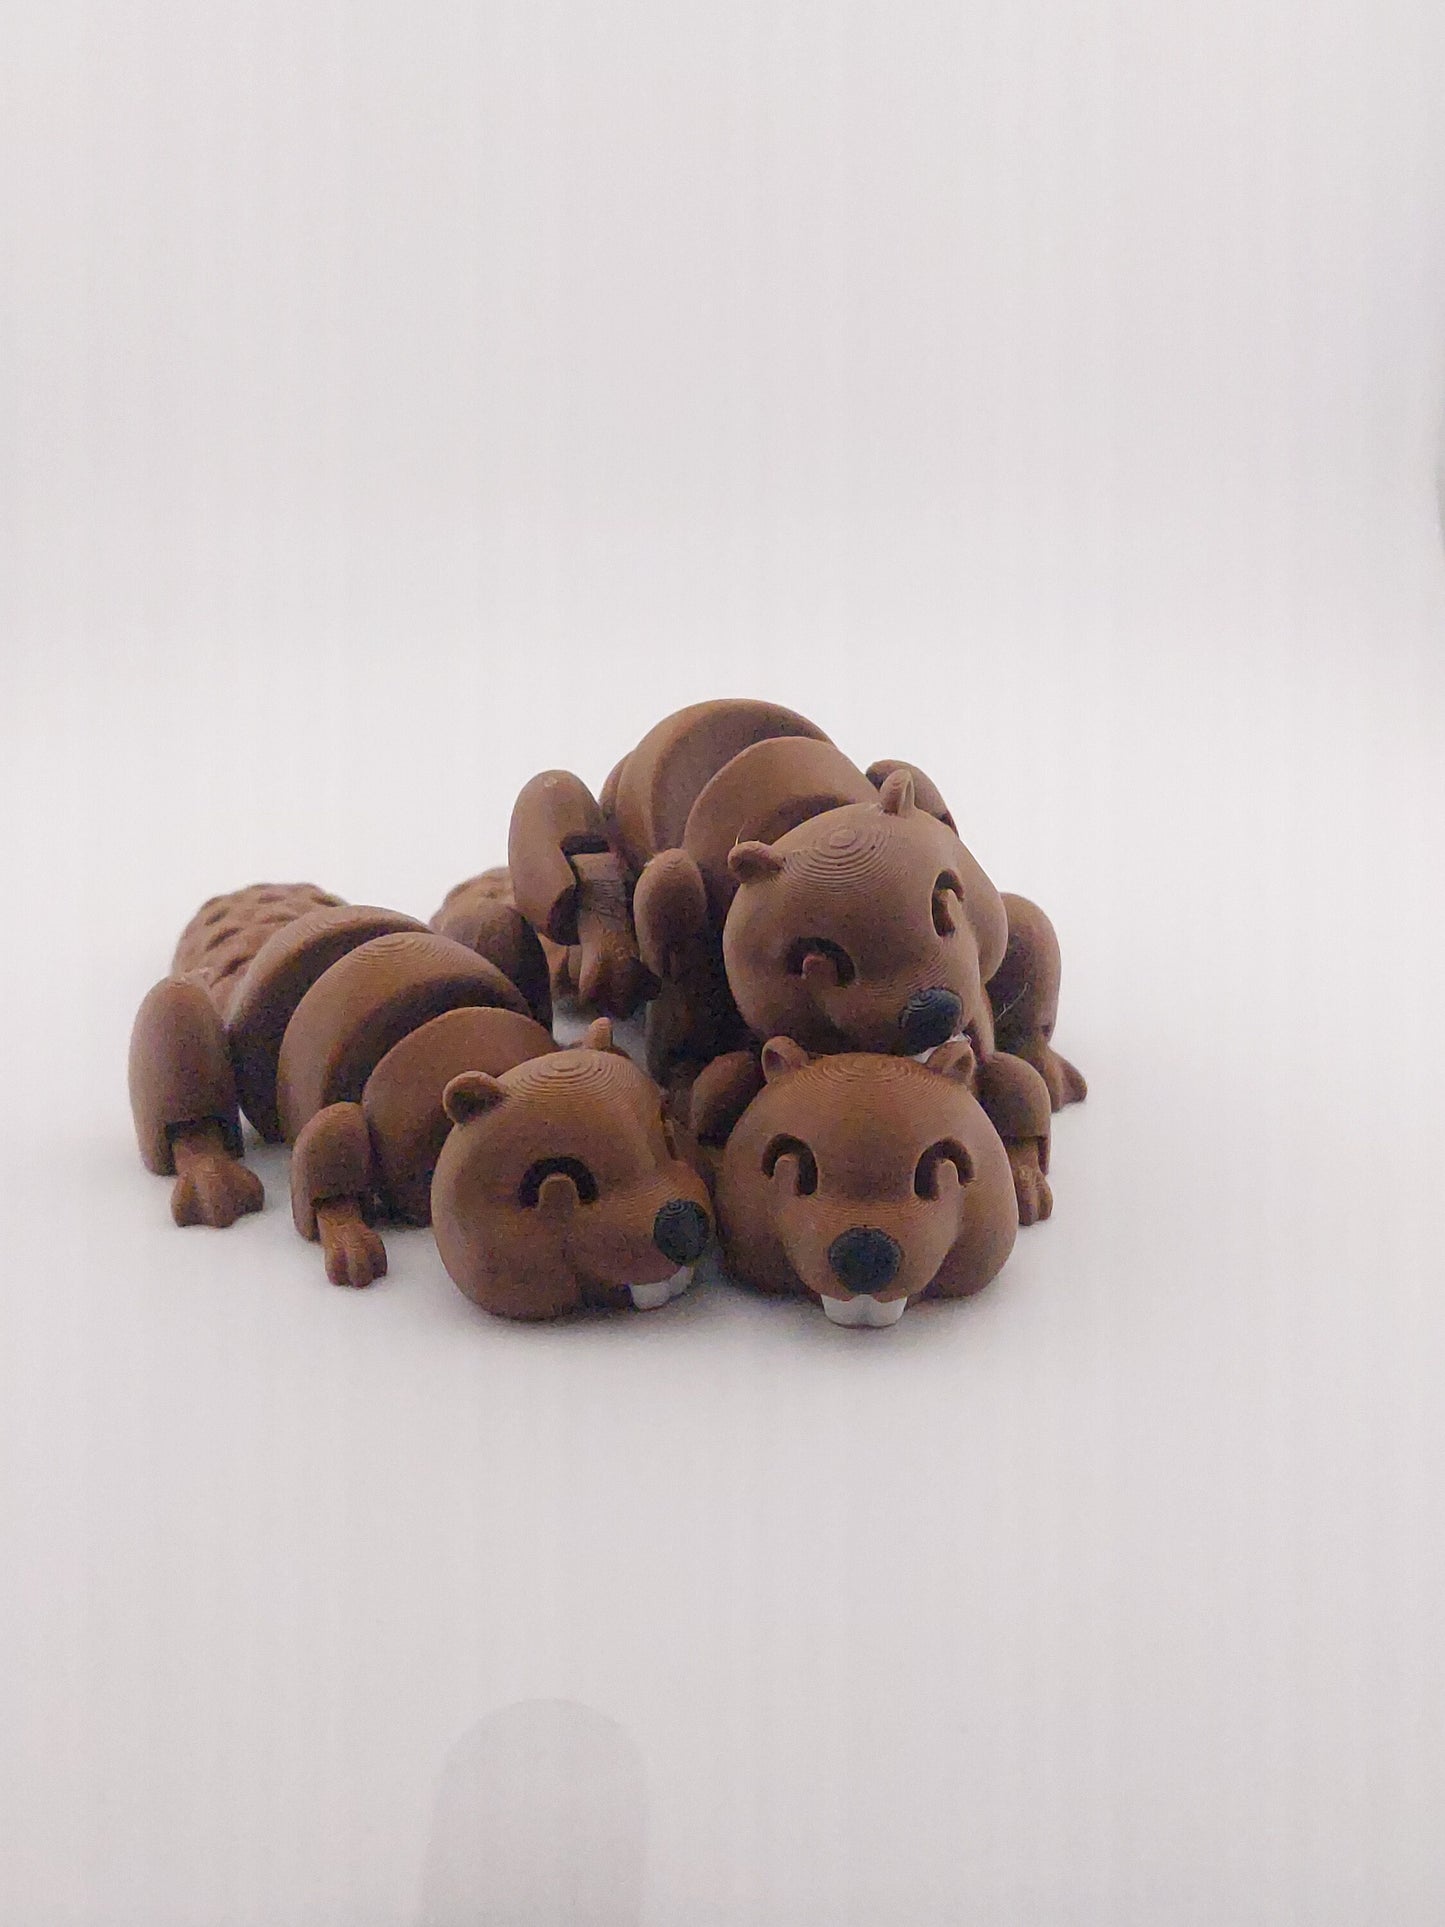 1 Articulated Painted Beaver - 3D Printed Fidget Fantasy Creature